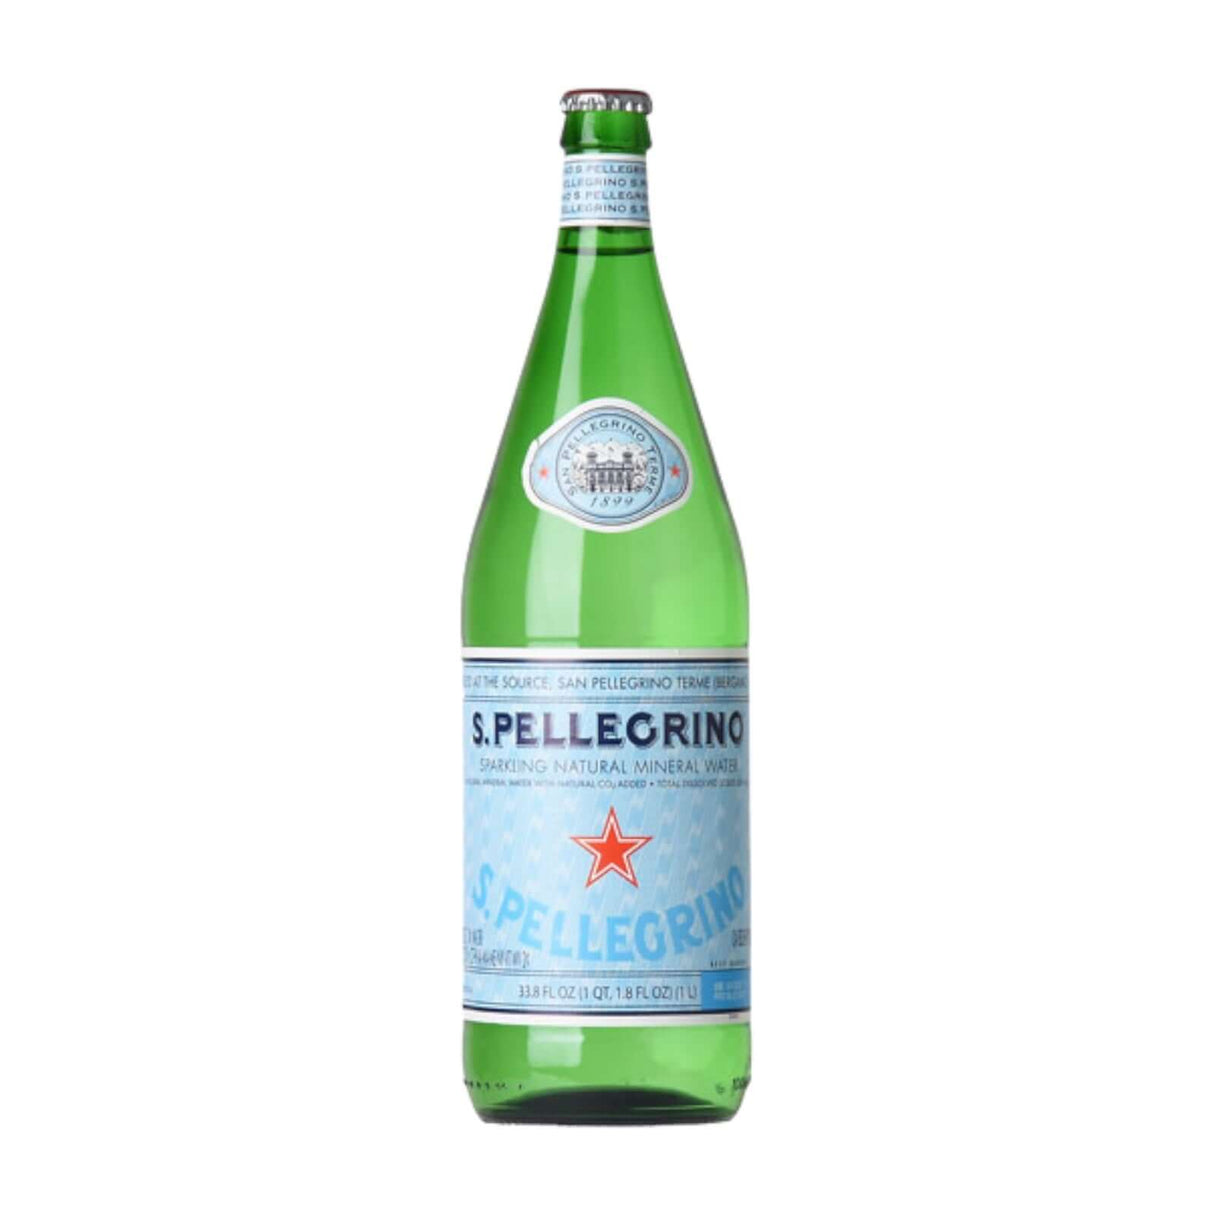 S.Pellegrino Unflavored Sparkling Natural Mineral Water